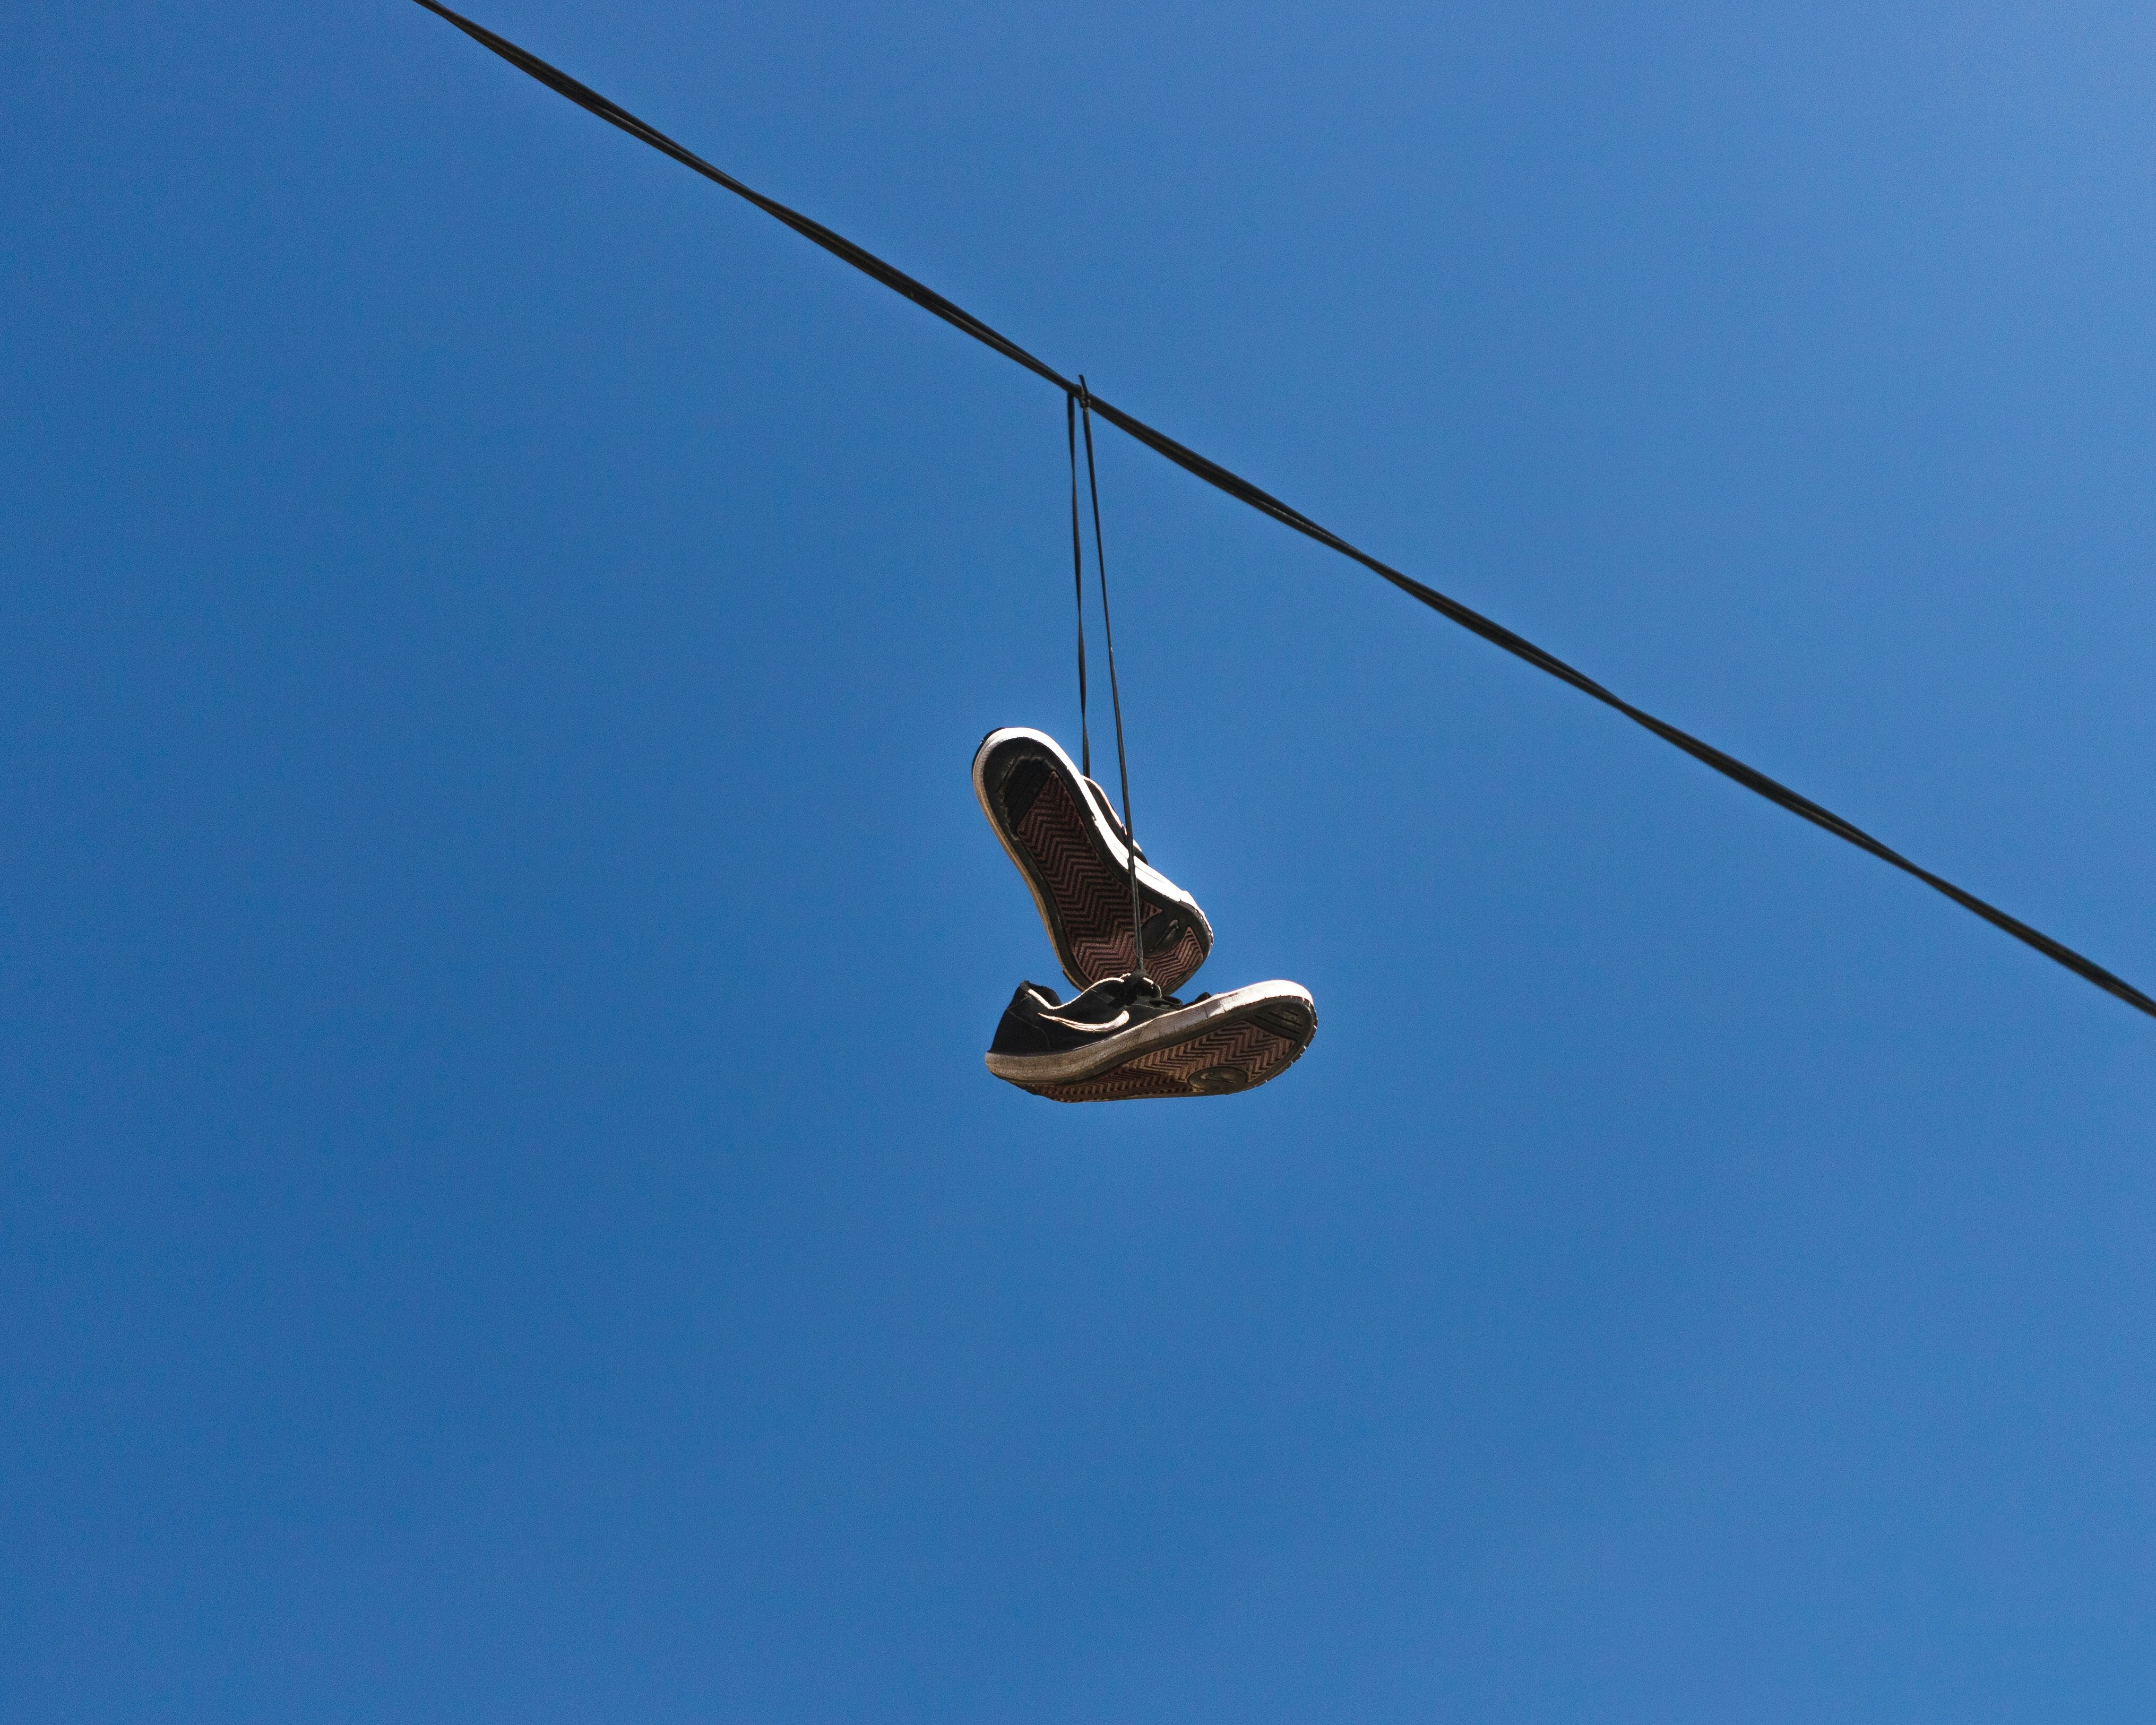 black and white sneakers on black wire under blue sky during daytime